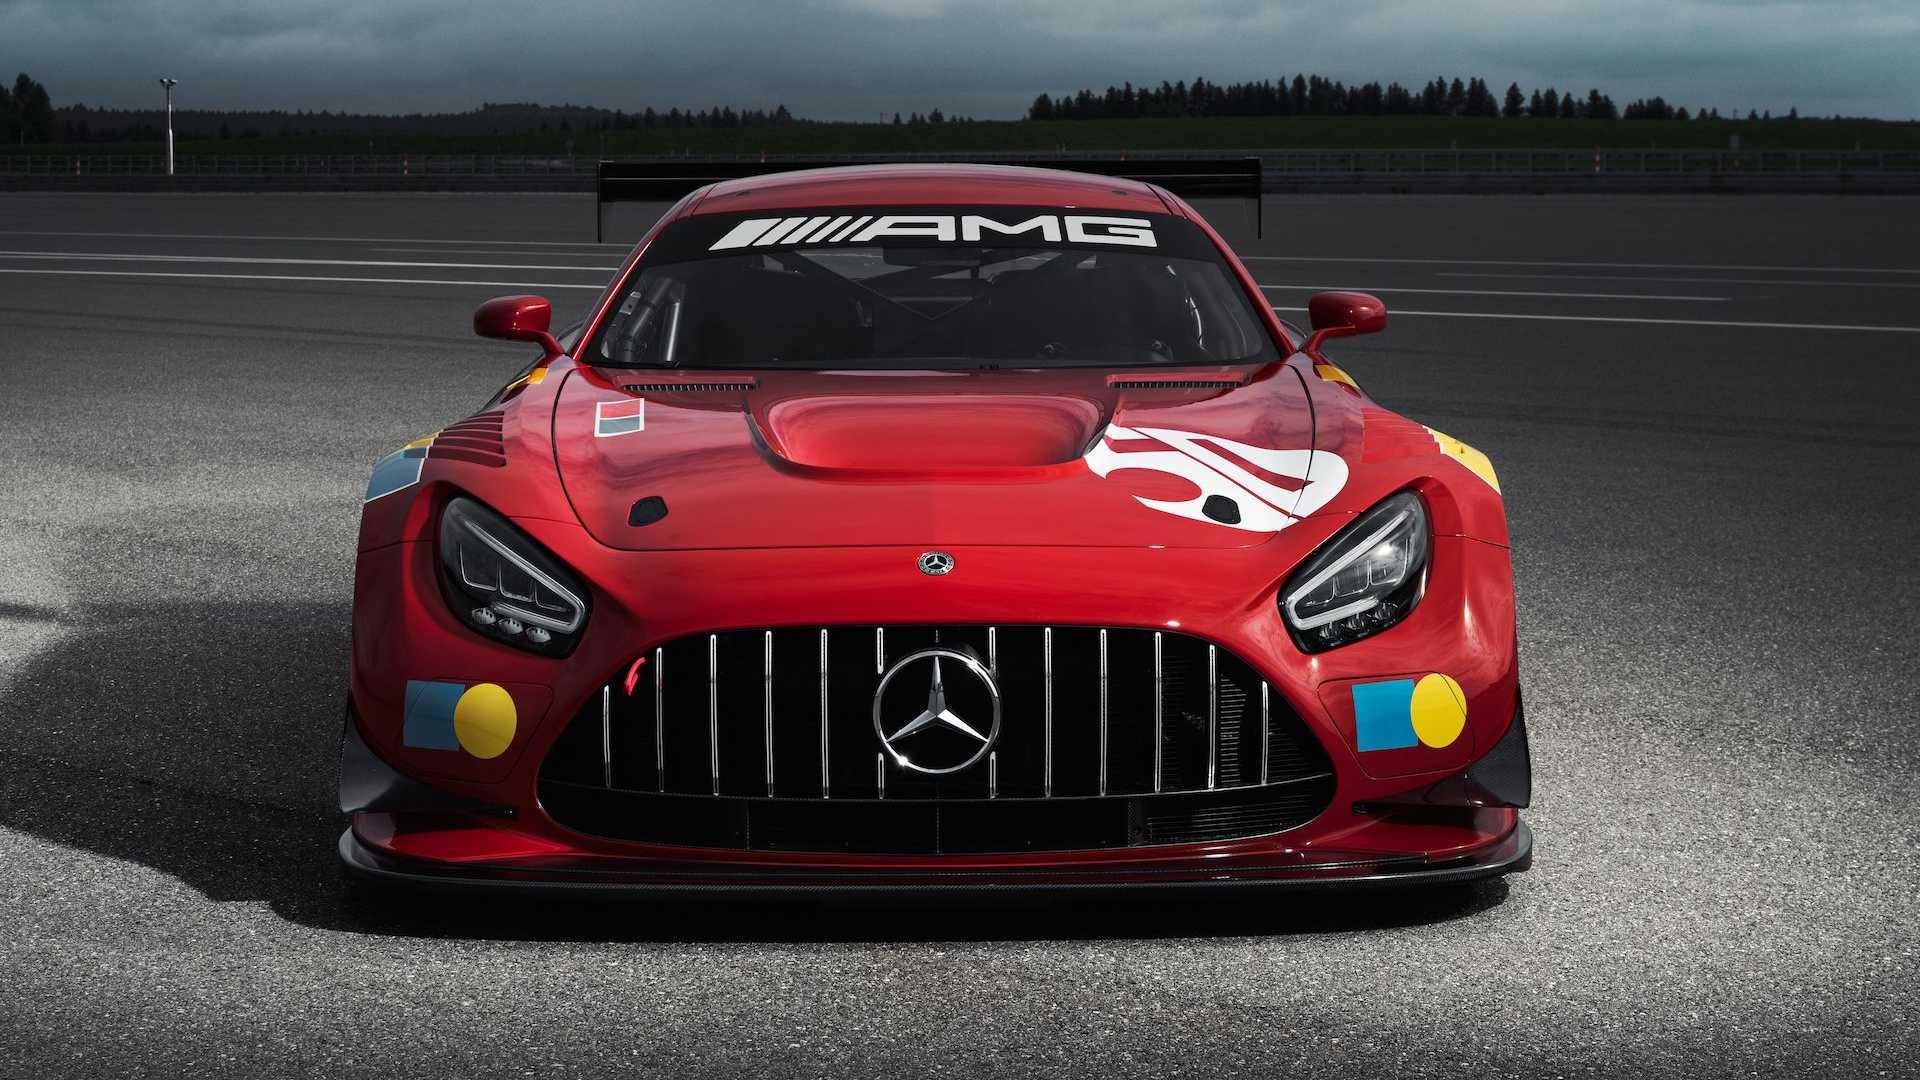 Mercedes-AMG “50 Years Legend of Spa”